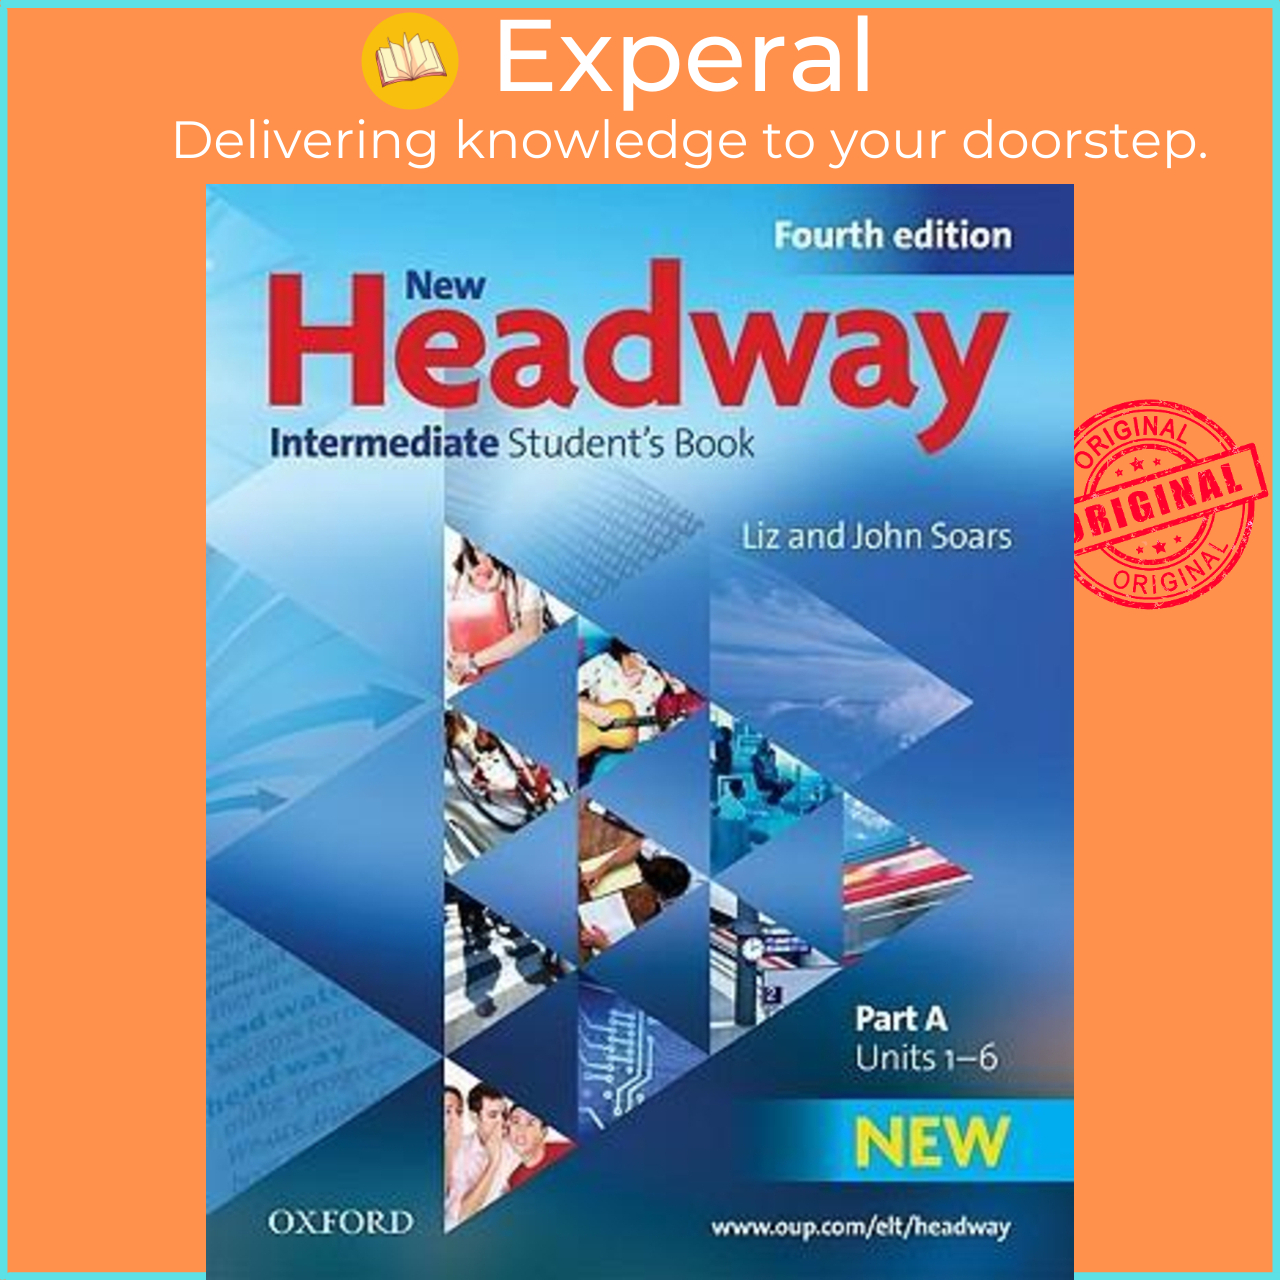 paperback)　Student's　by　New　c　Headway:　Liz　The　Lazada　Intermediate　(UK　most　B1:　Book　Soars　A　Singapore　world's　trusted　English　edition,